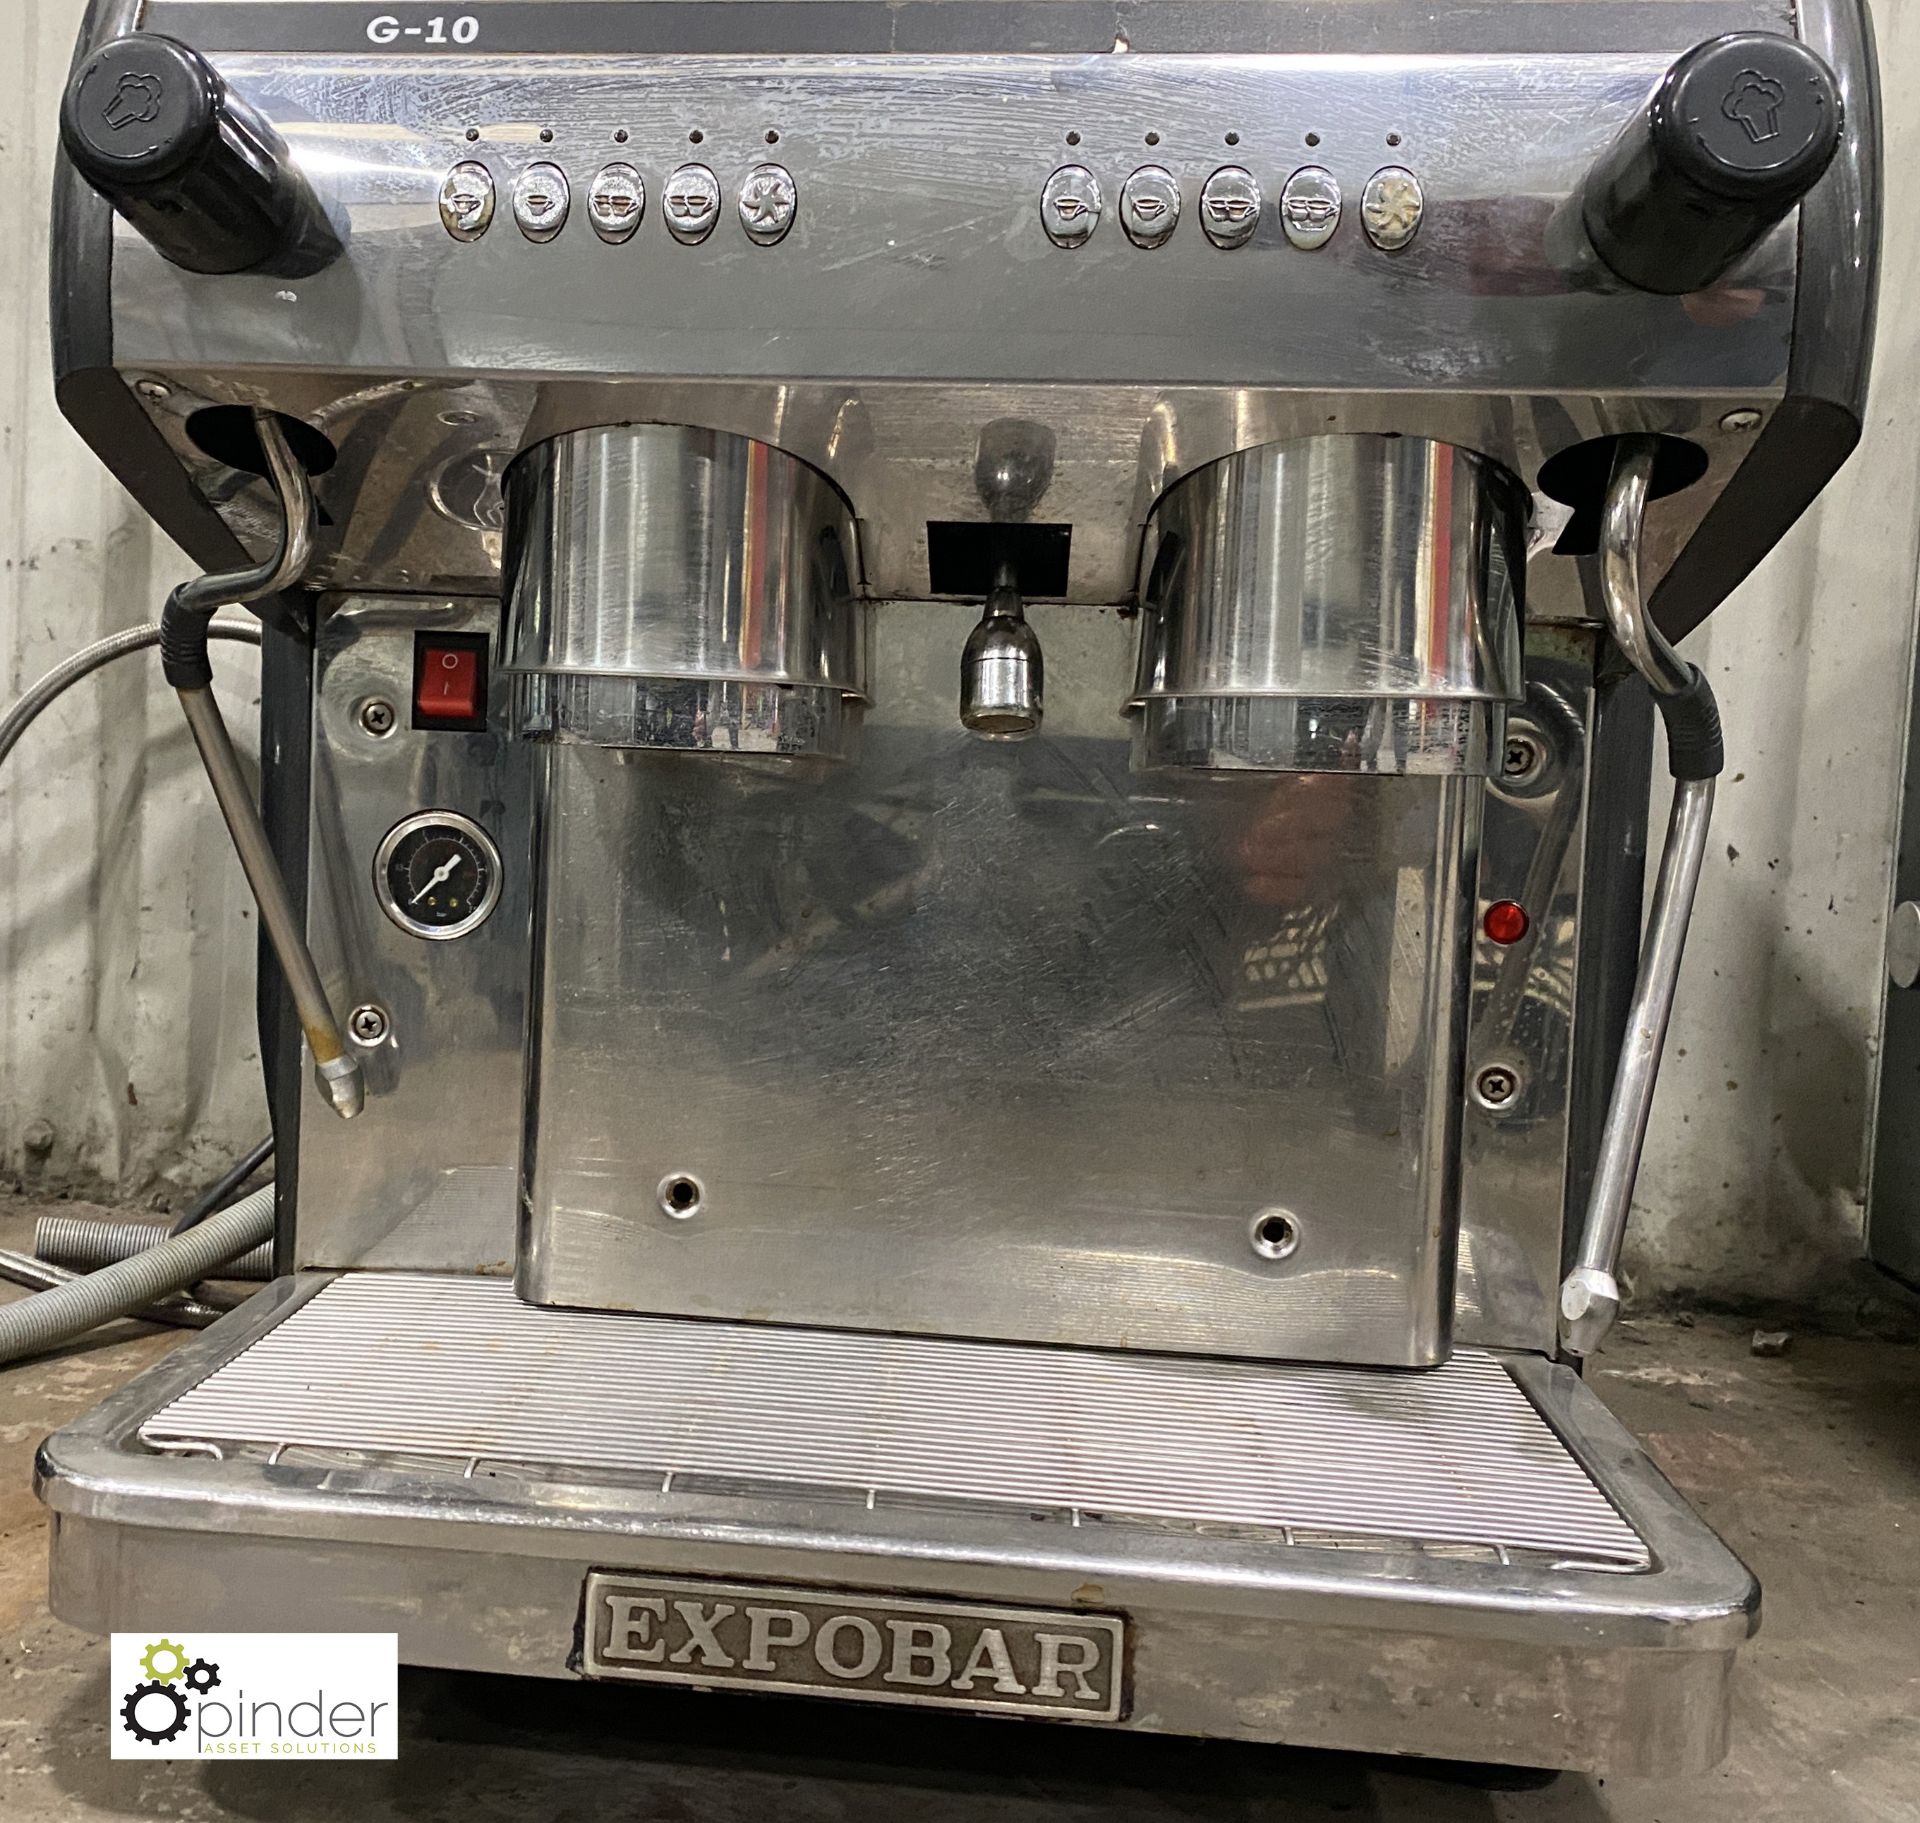 Rijo Expobar G10 Processional 2-cup Espresso Machine, 240volts - Image 4 of 5